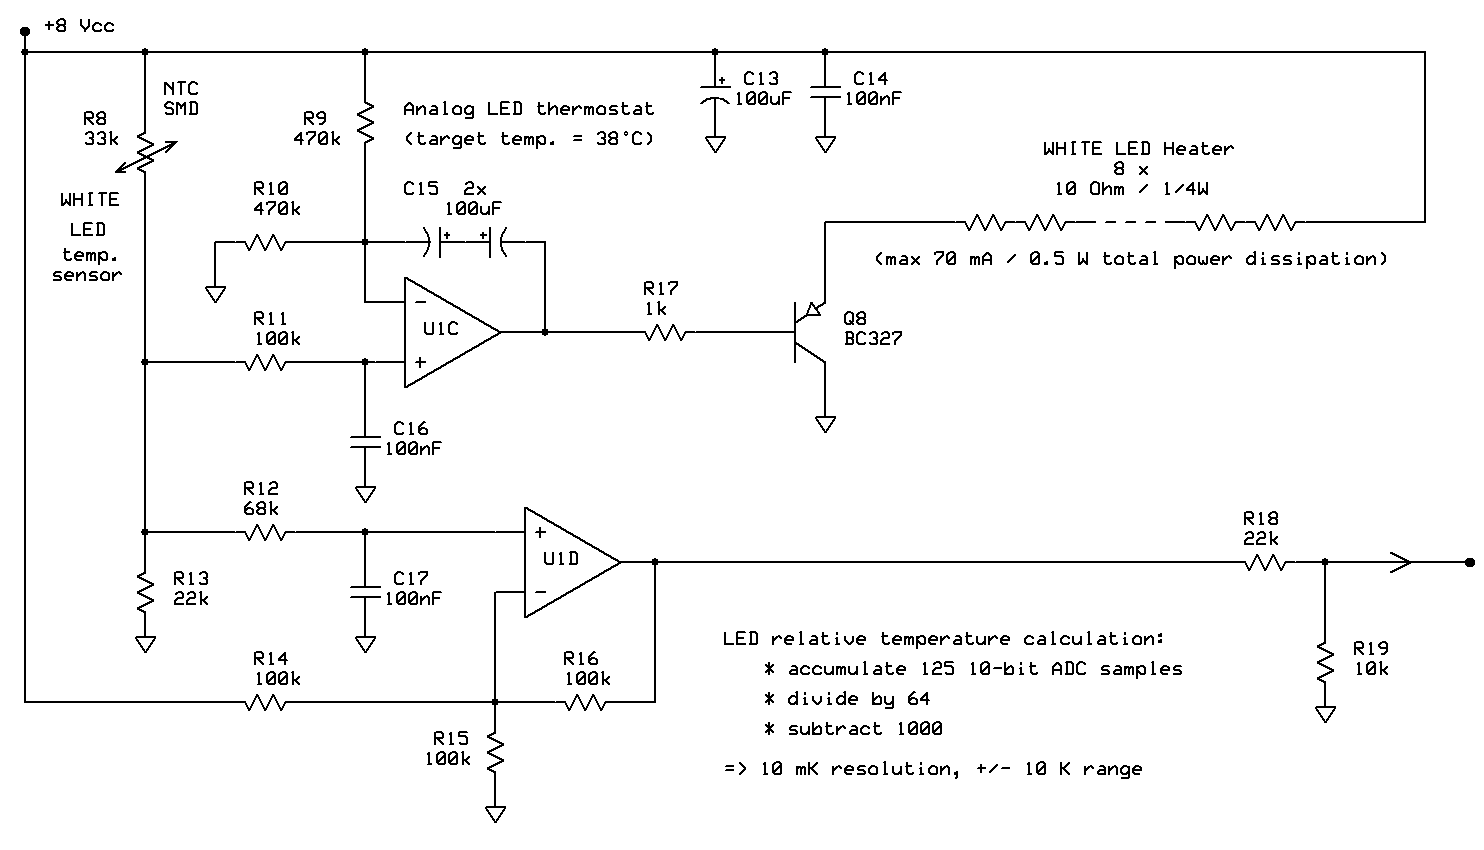 Thermostat circuit for astro lab LED